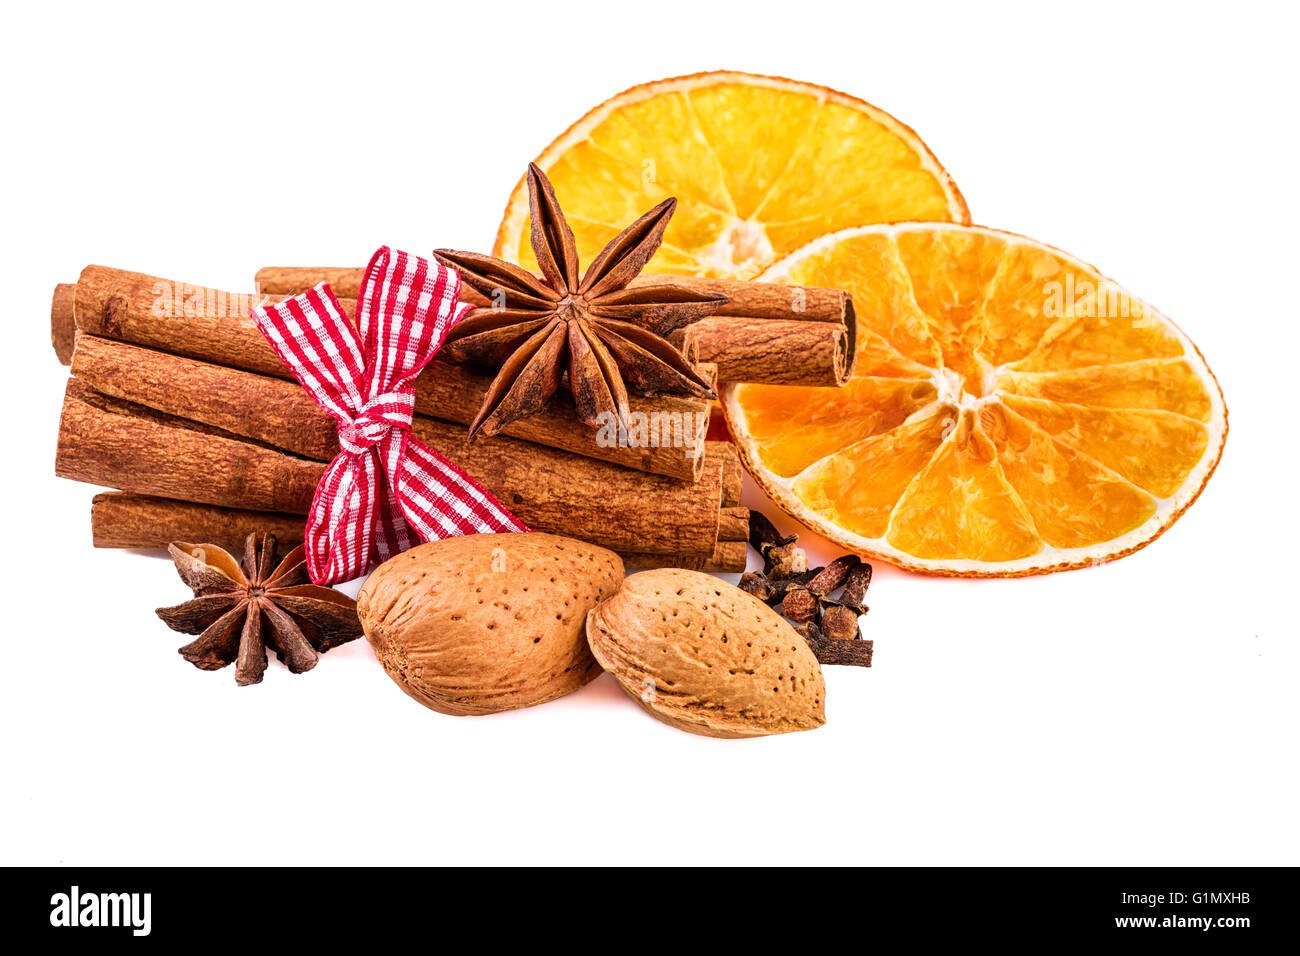 Christmas spices cinnamon, anise, clove, almond nuts and dried orange slices. Stock Photo